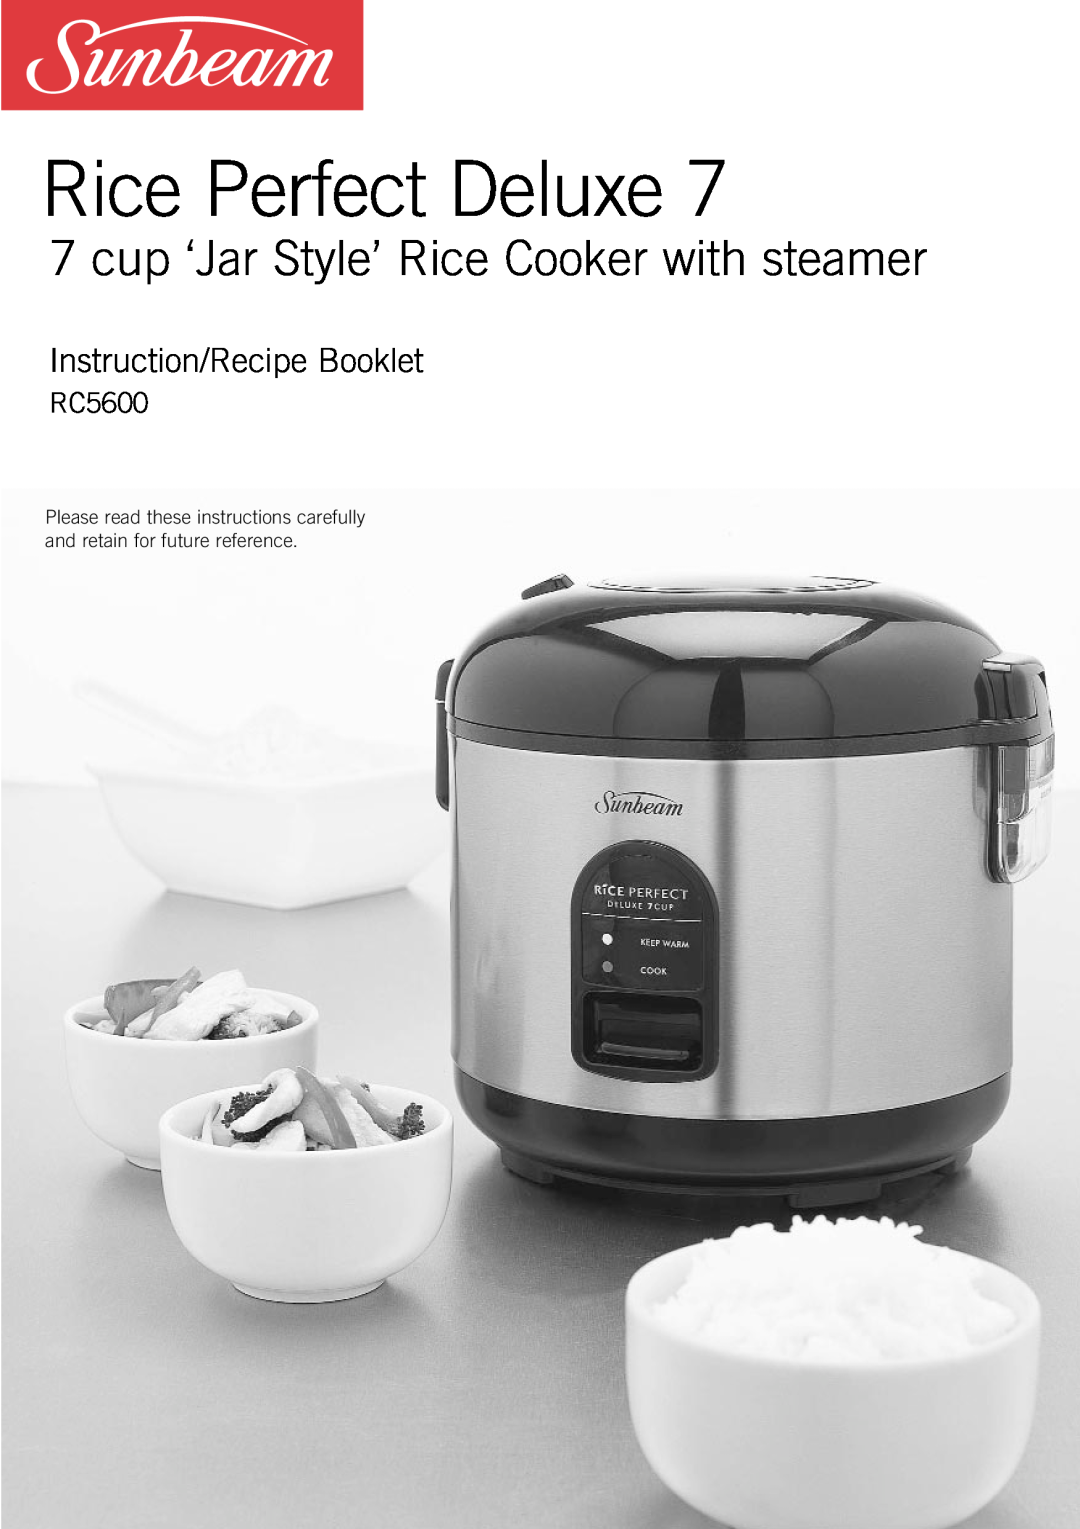 Sunbeam RC5600 manual Rice Perfect Deluxe, cup ‘Jar Style’ Rice Cooker with steamer, Instruction/Recipe Booklet 